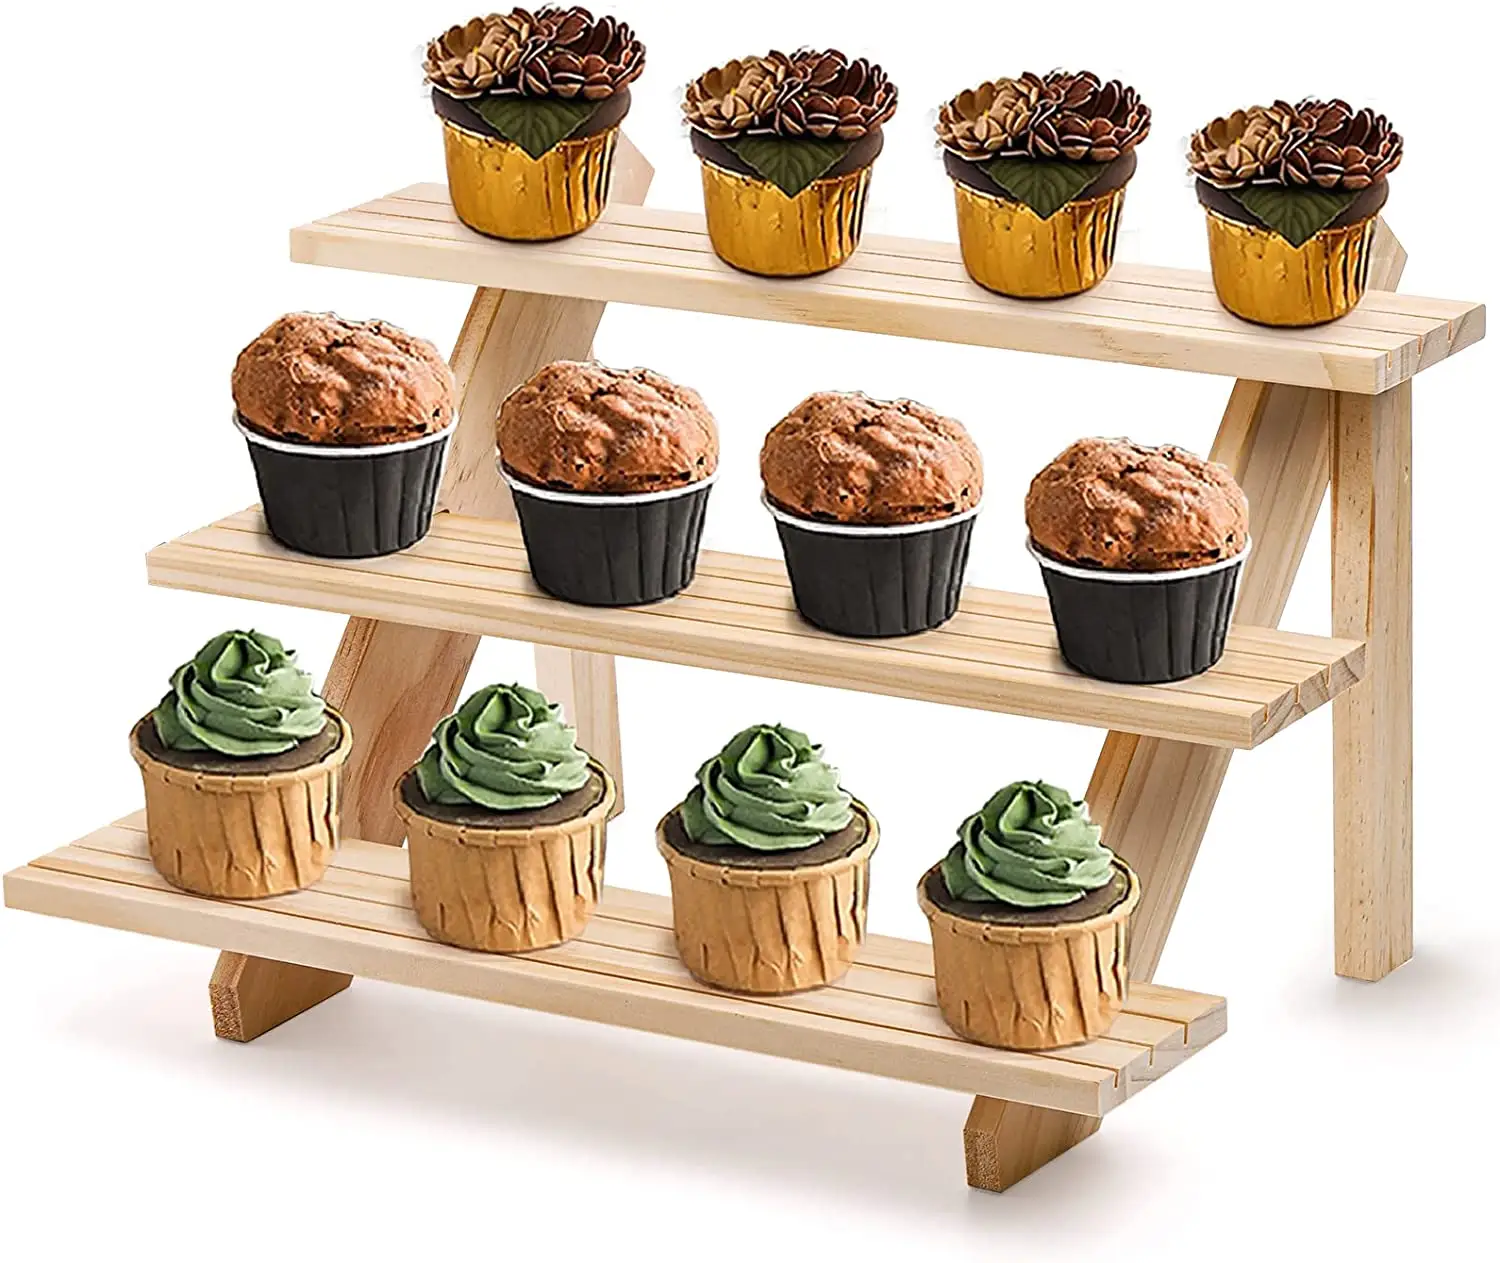 3 Tier Wooden Cupcake Stand  Rustic Retail Display Riser Jewelry Holder Stand for Cupcakes  Desserts  Brooch  Bracelet  Tabletop